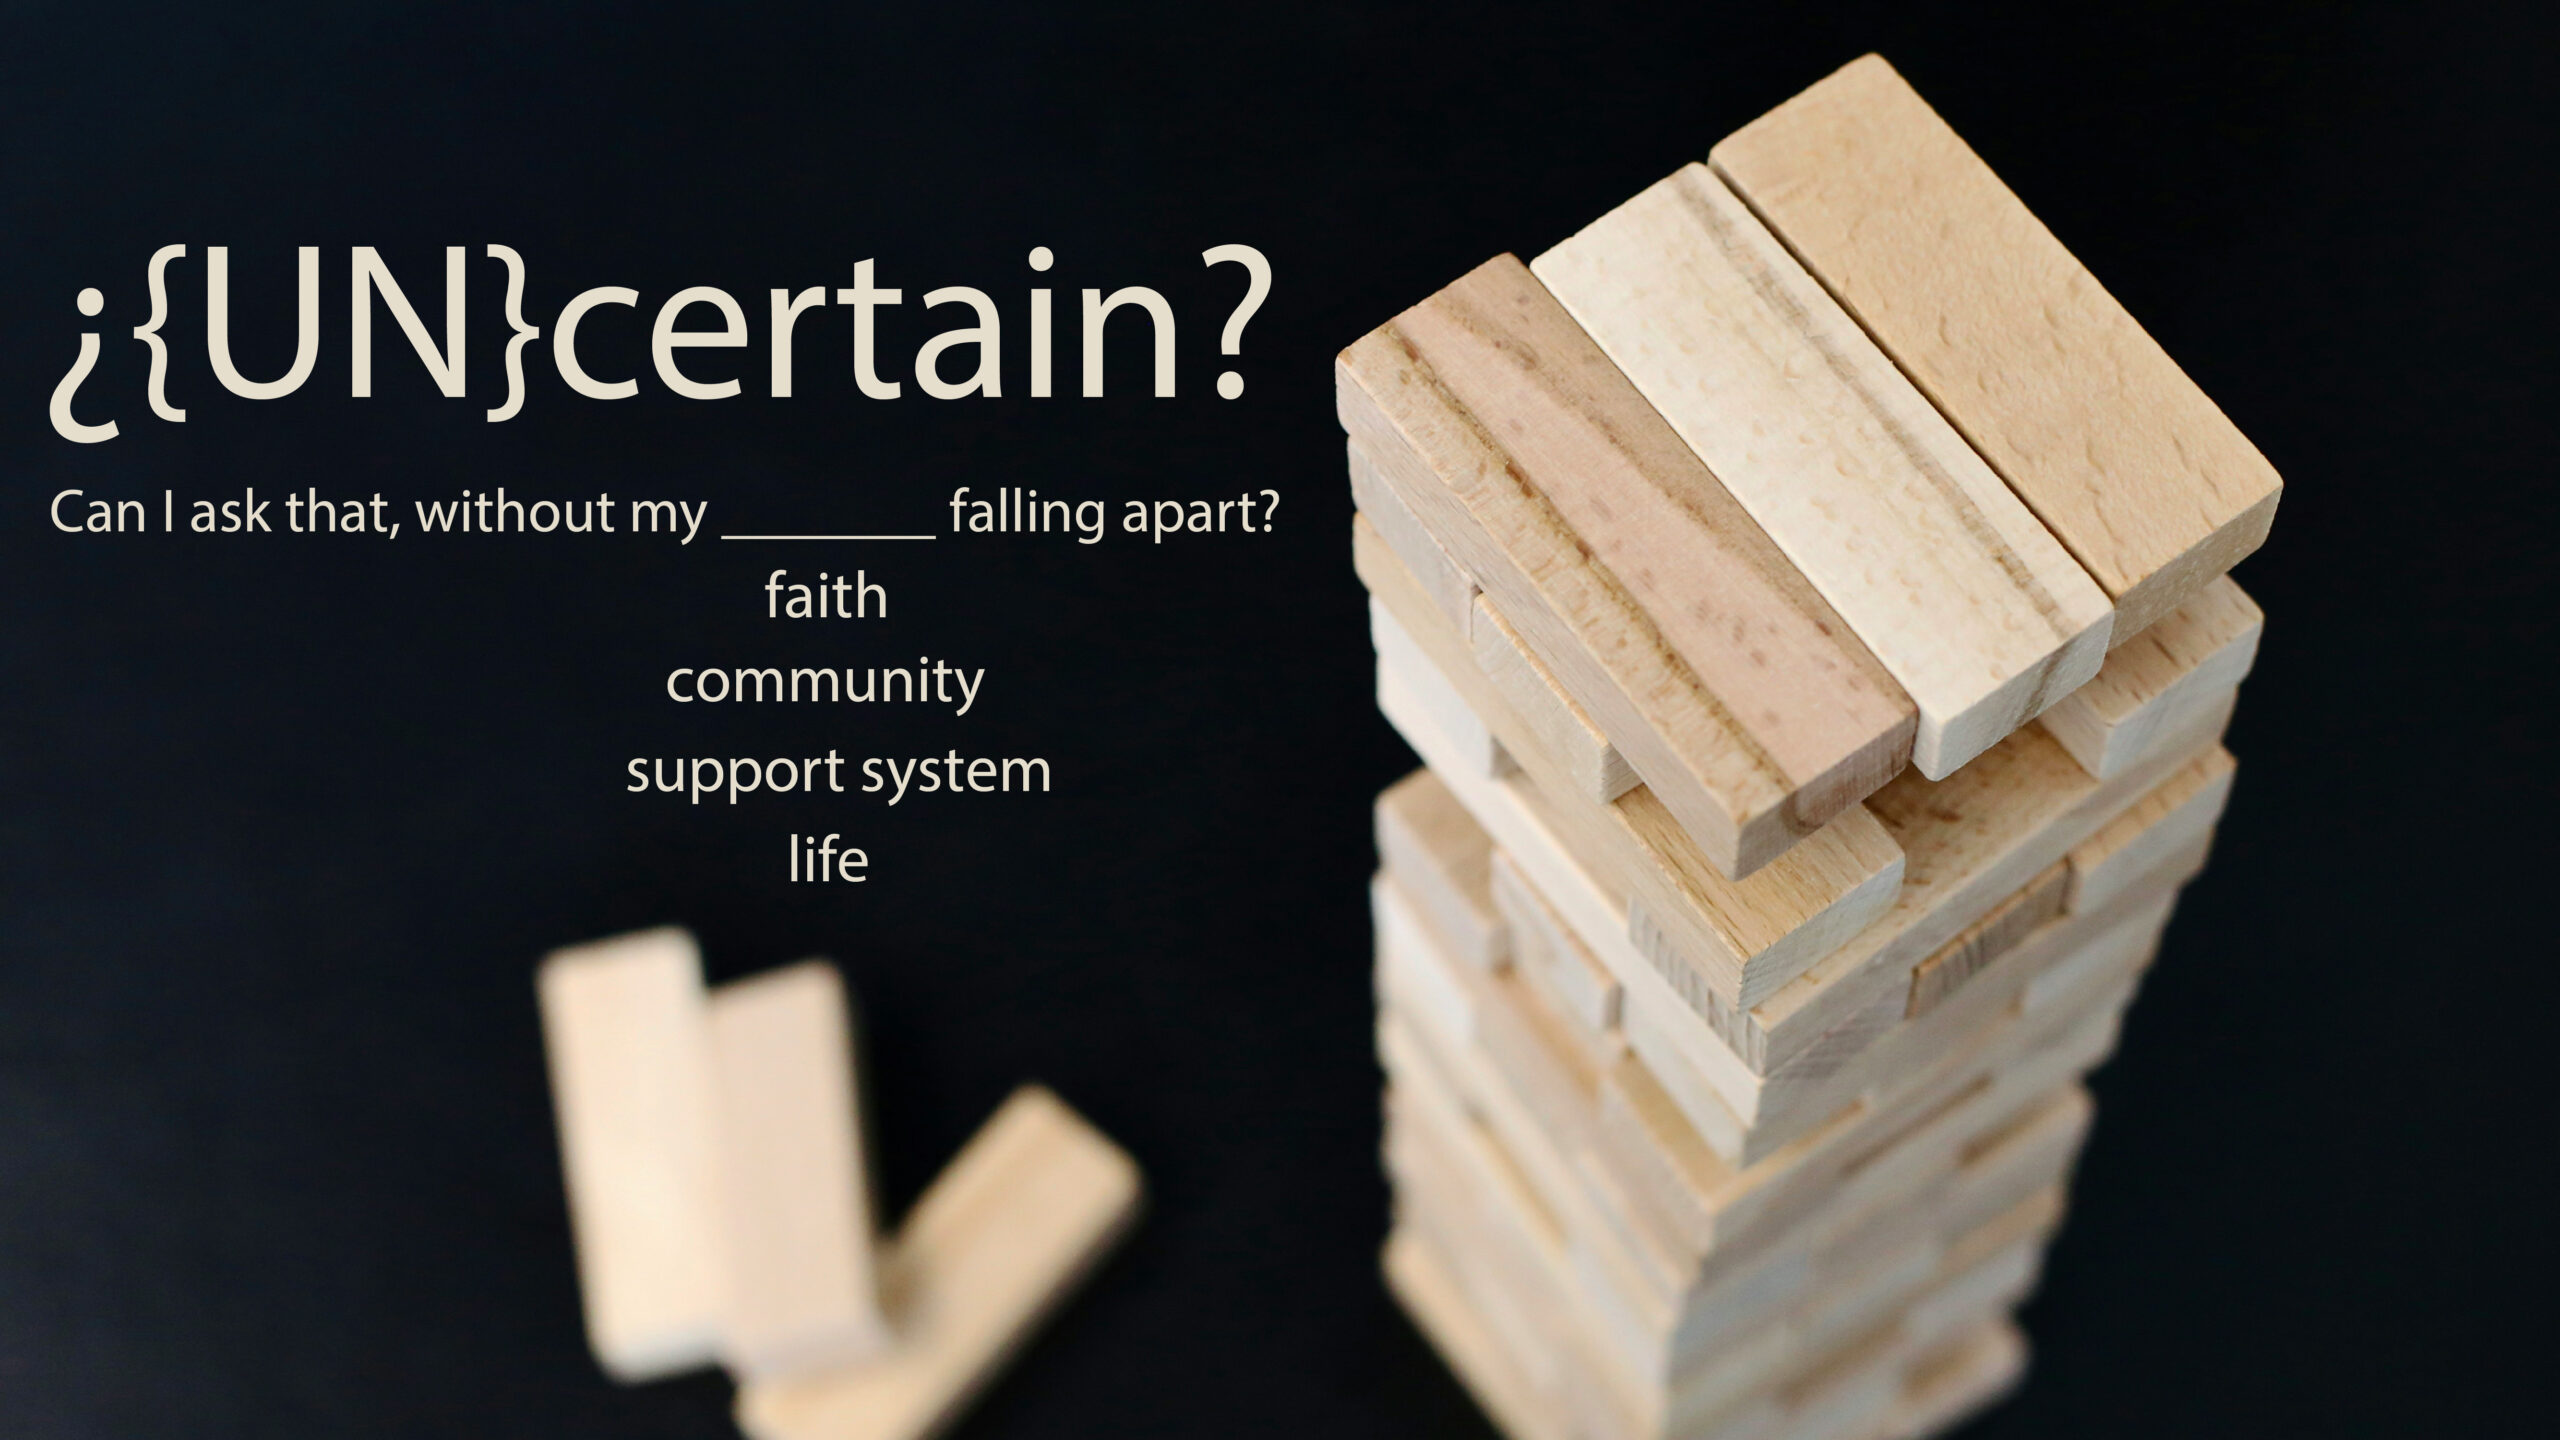 Worship series title image for "Uncertain?", showing jenga tiles, and the text: Uncertain? Can I ask that without my faith, community, support system, or life falling apart?